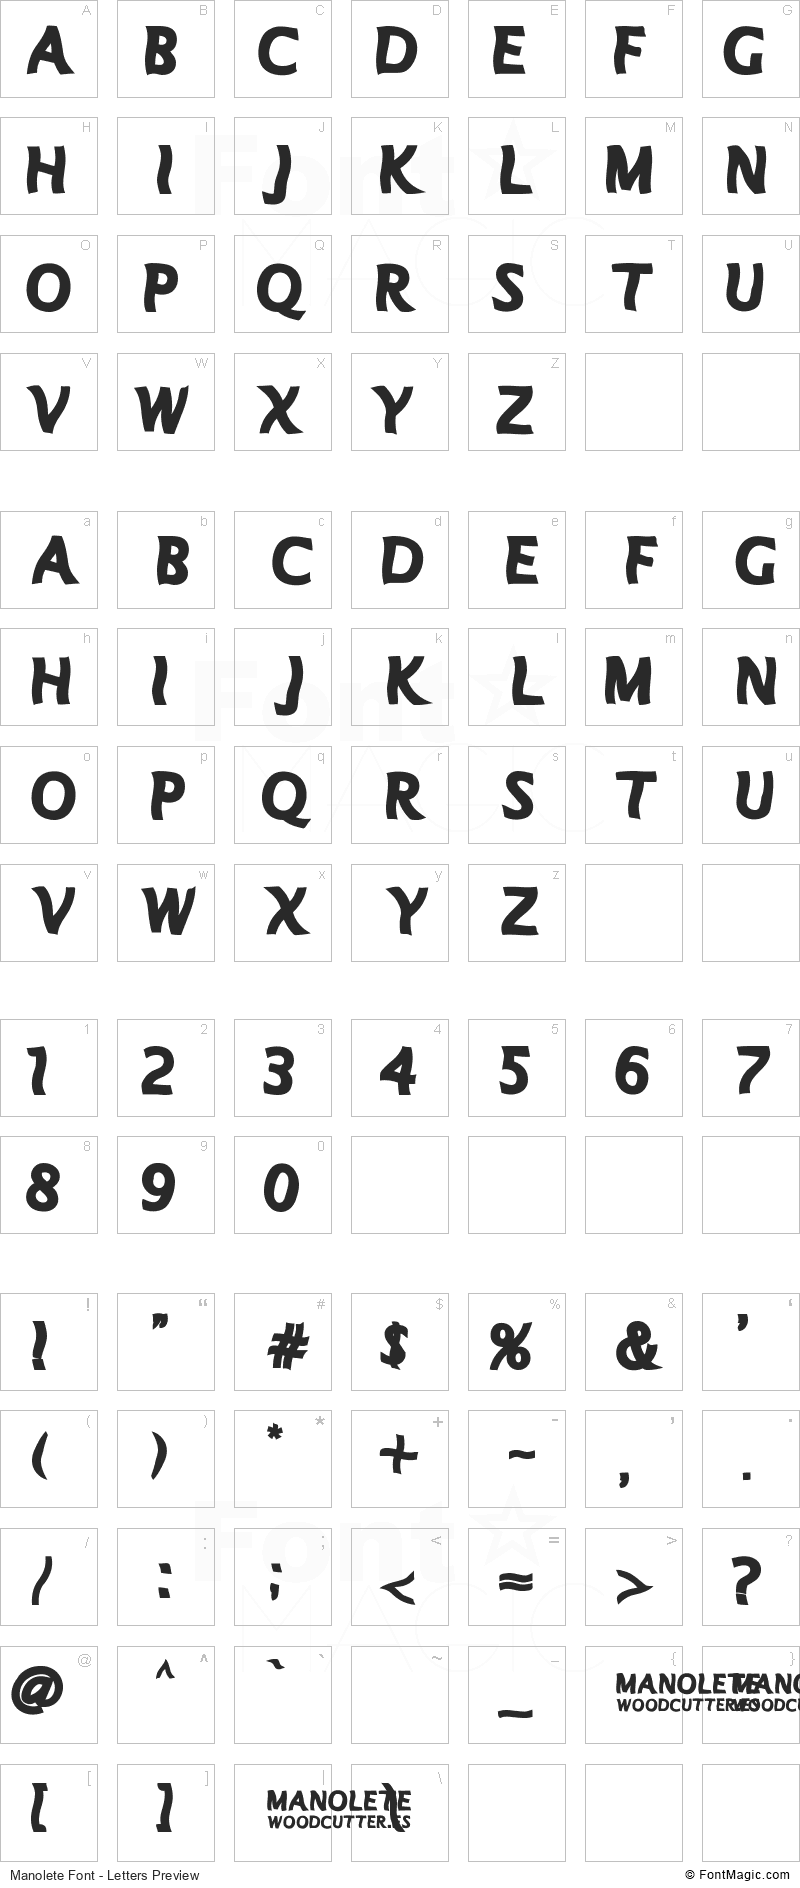 Manolete Font - All Latters Preview Chart